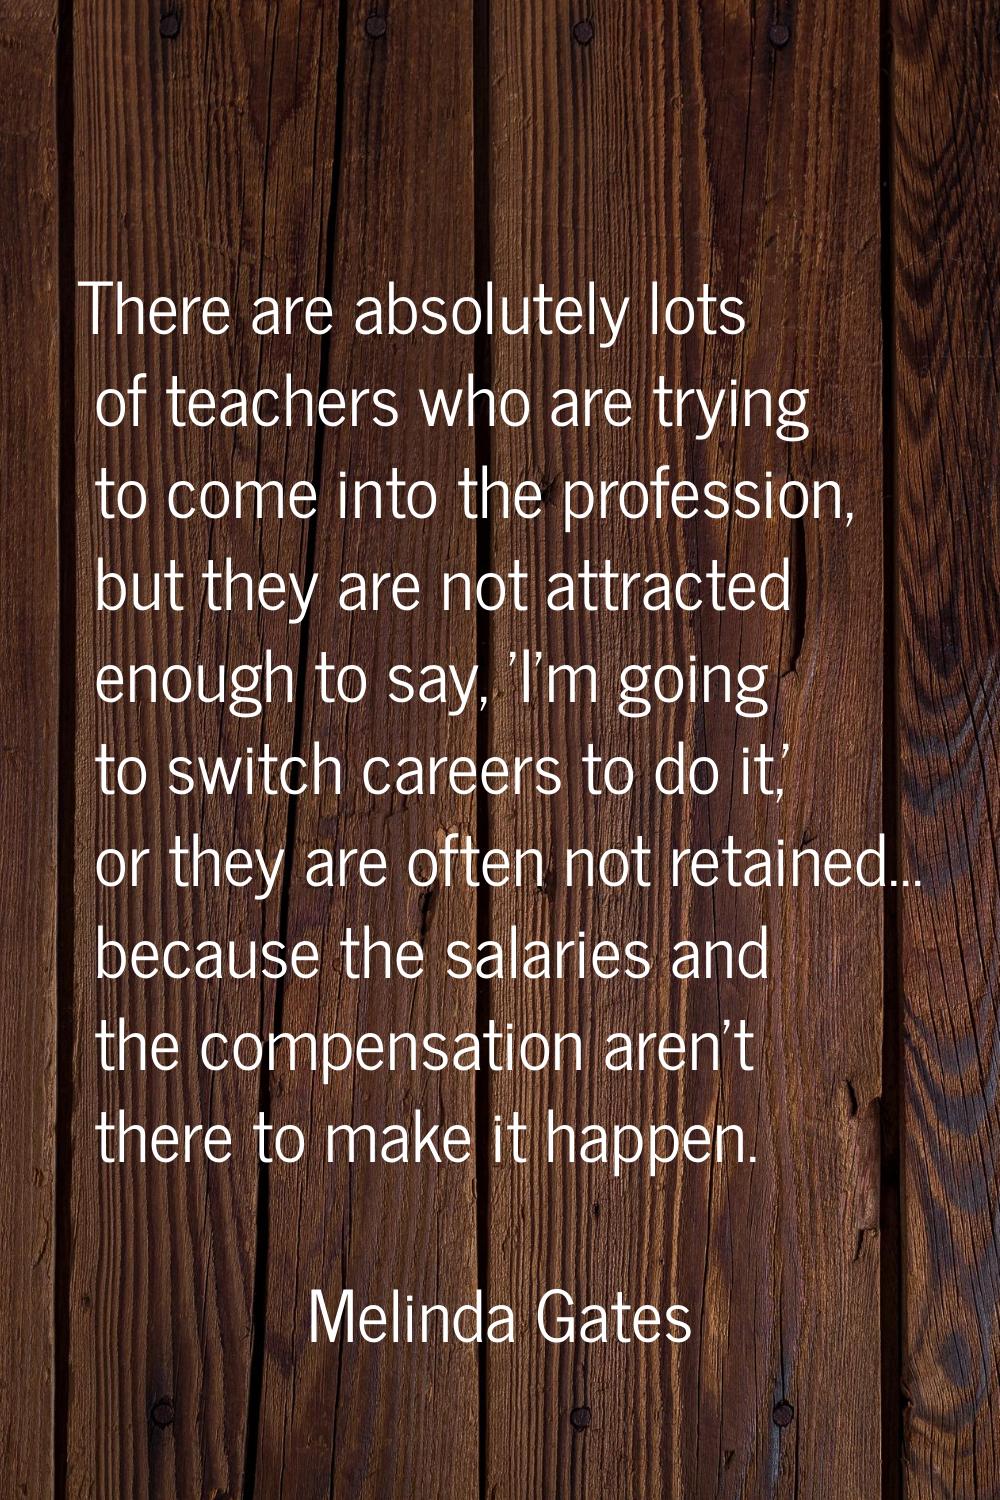 There are absolutely lots of teachers who are trying to come into the profession, but they are not 